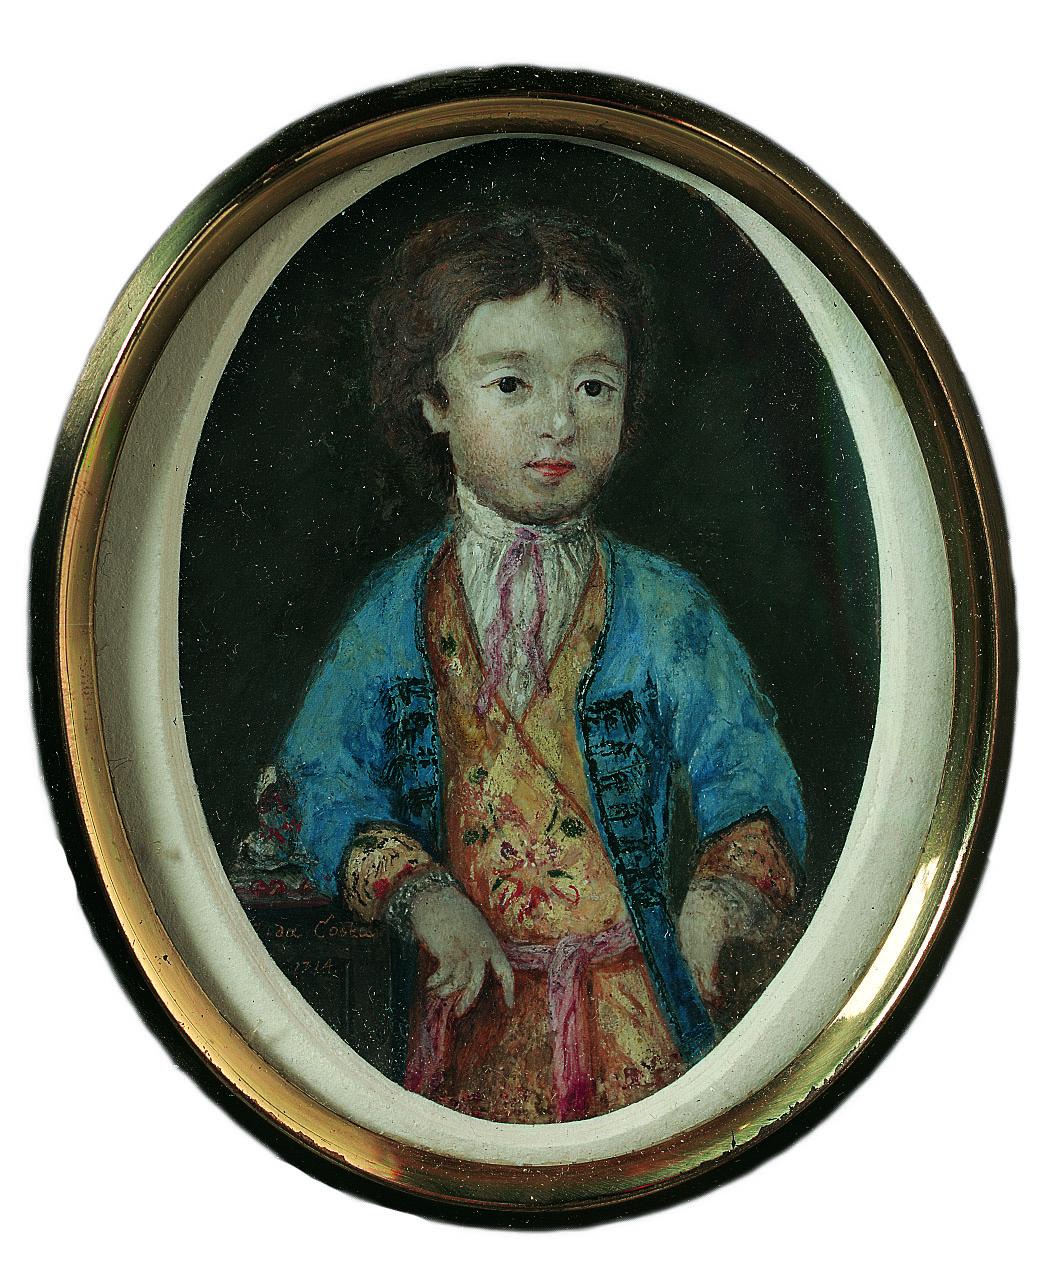 Portrait painting in circular frame of boy leaning to one side and facing viewer. 